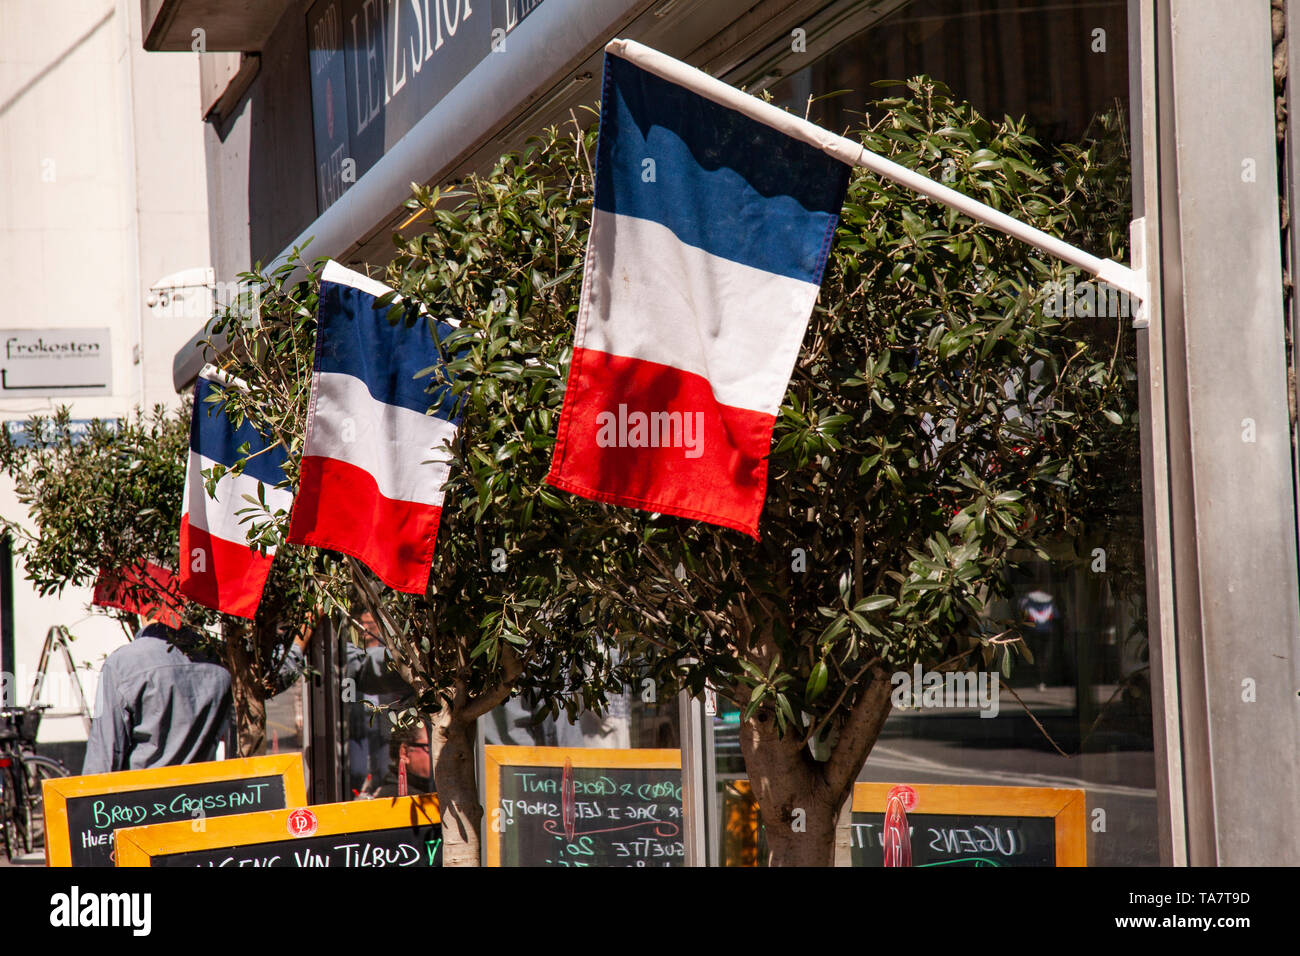 French cafe terrace flies the tri-colors in front of restaurant and shop.  Outside image with chairs, tables, billbords and olive trees Stock Photo -  Alamy